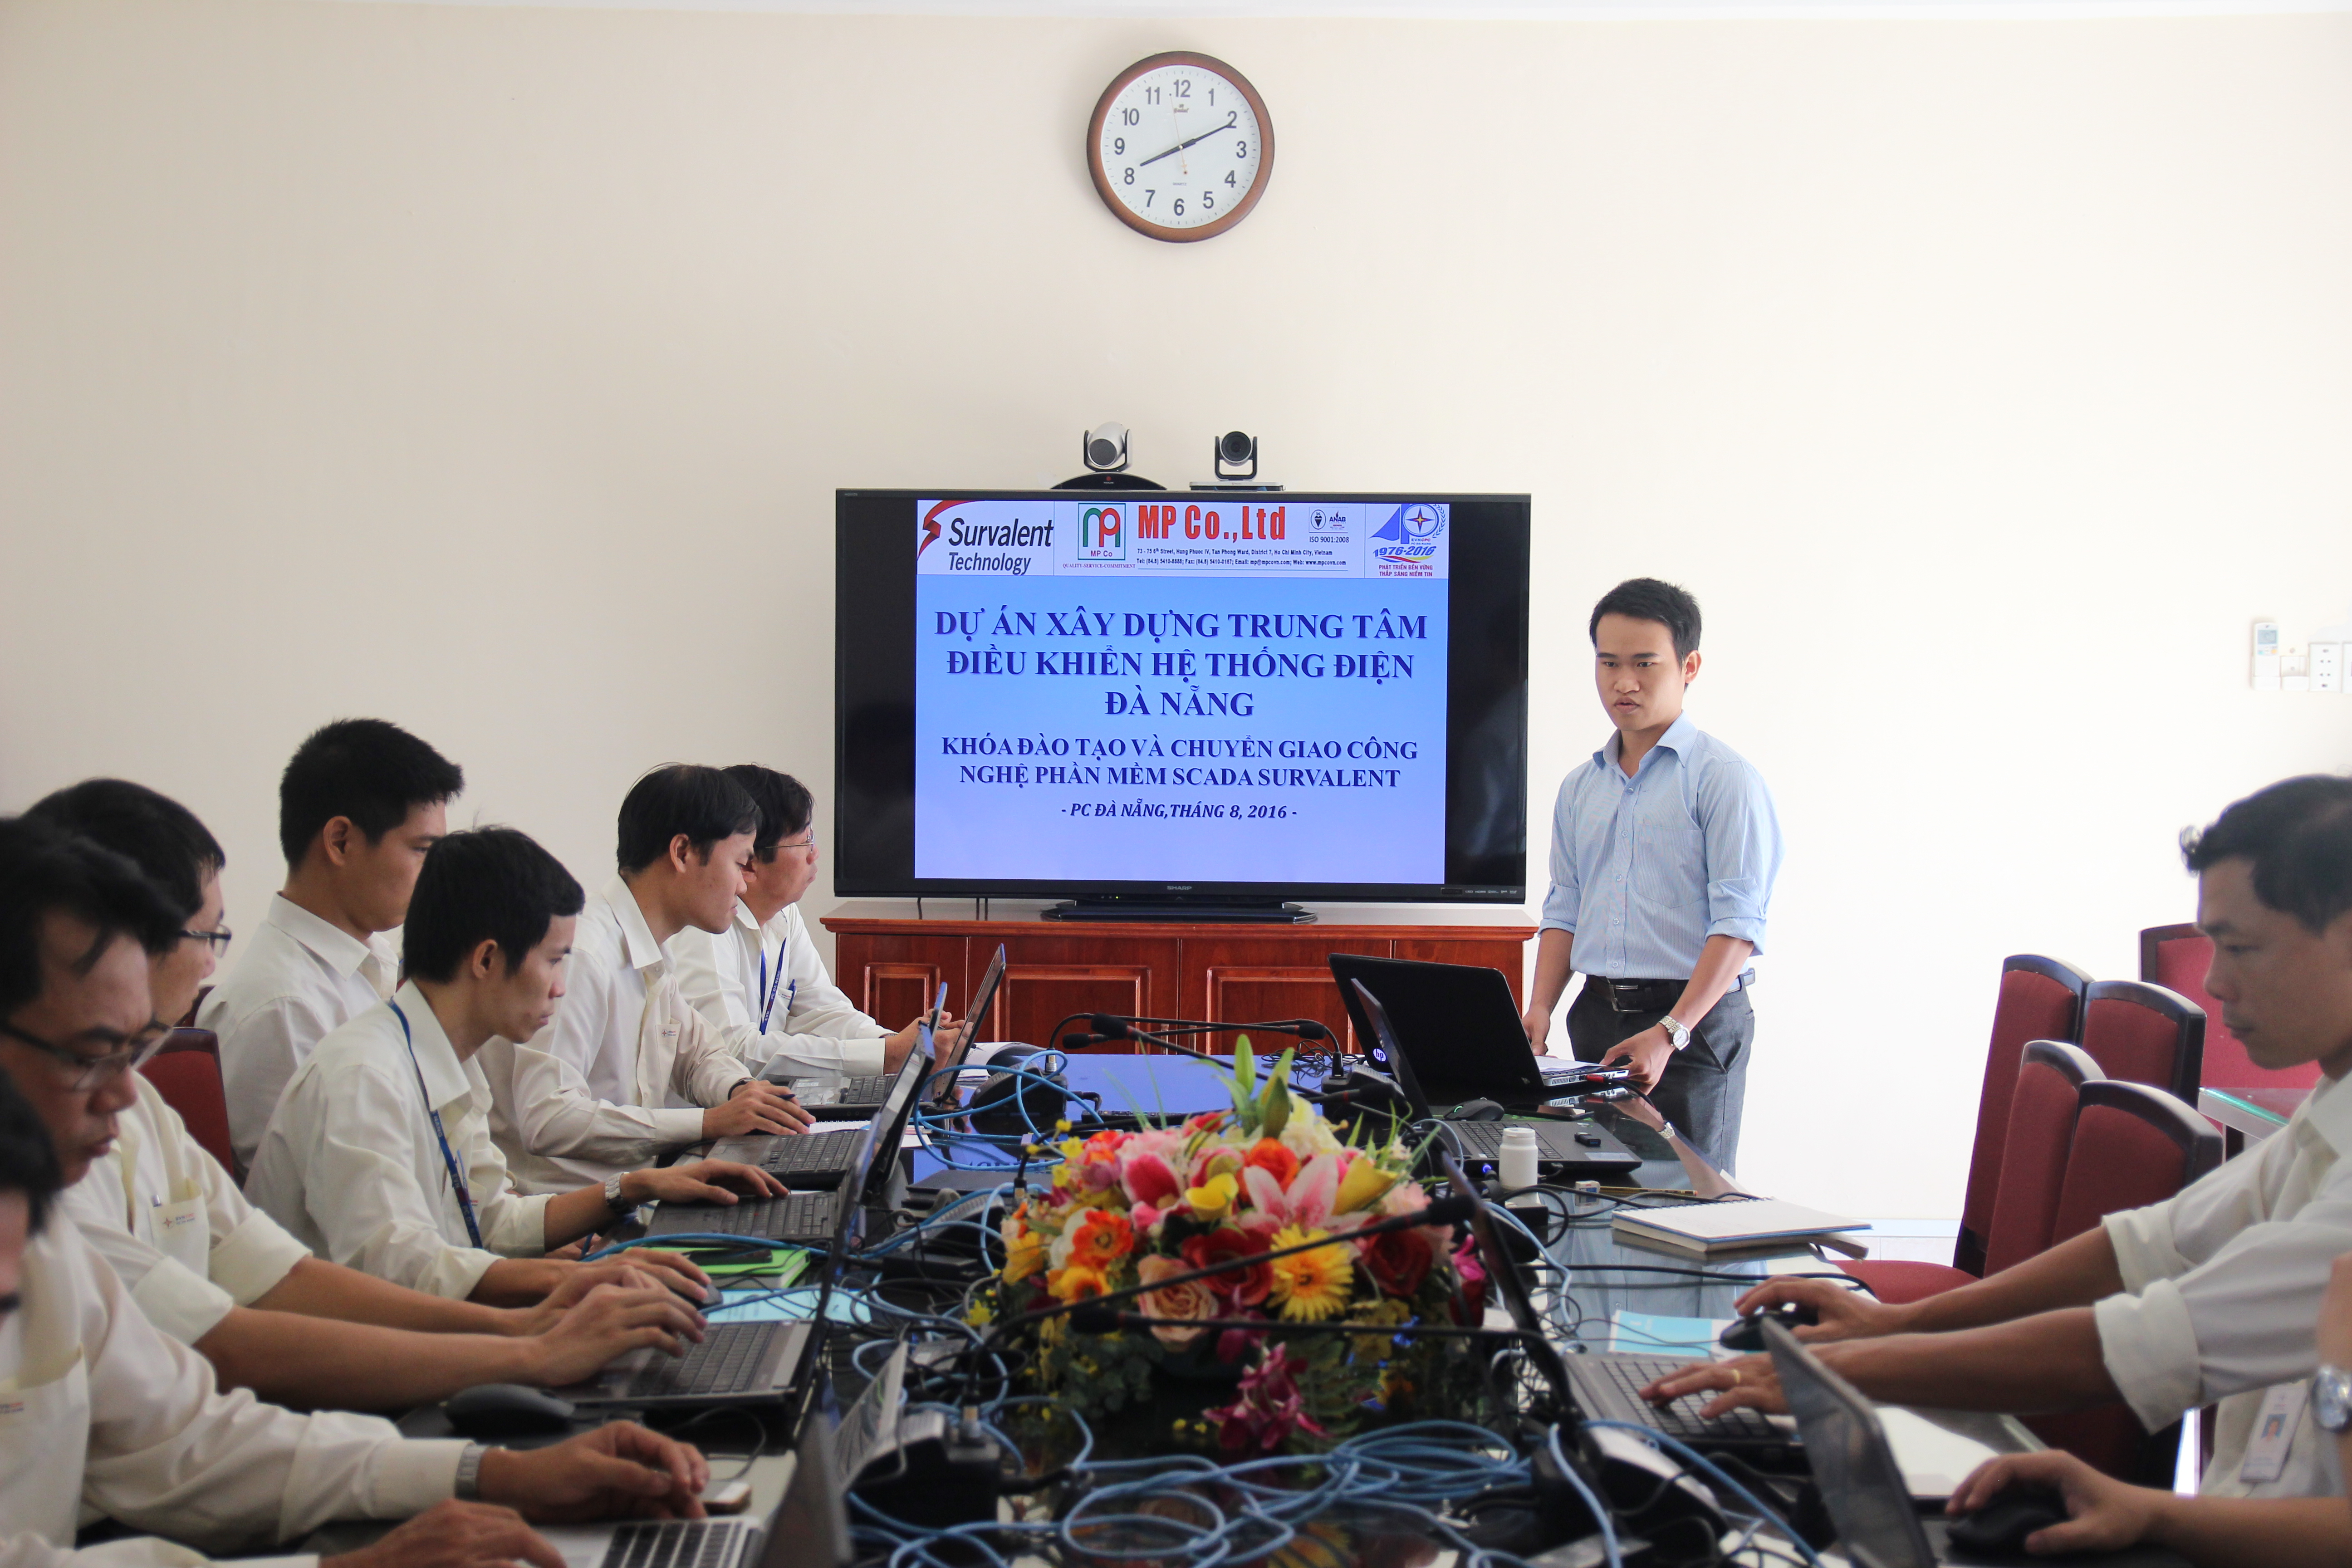 The Implementation of Building Control Center at Da Nang Power Company